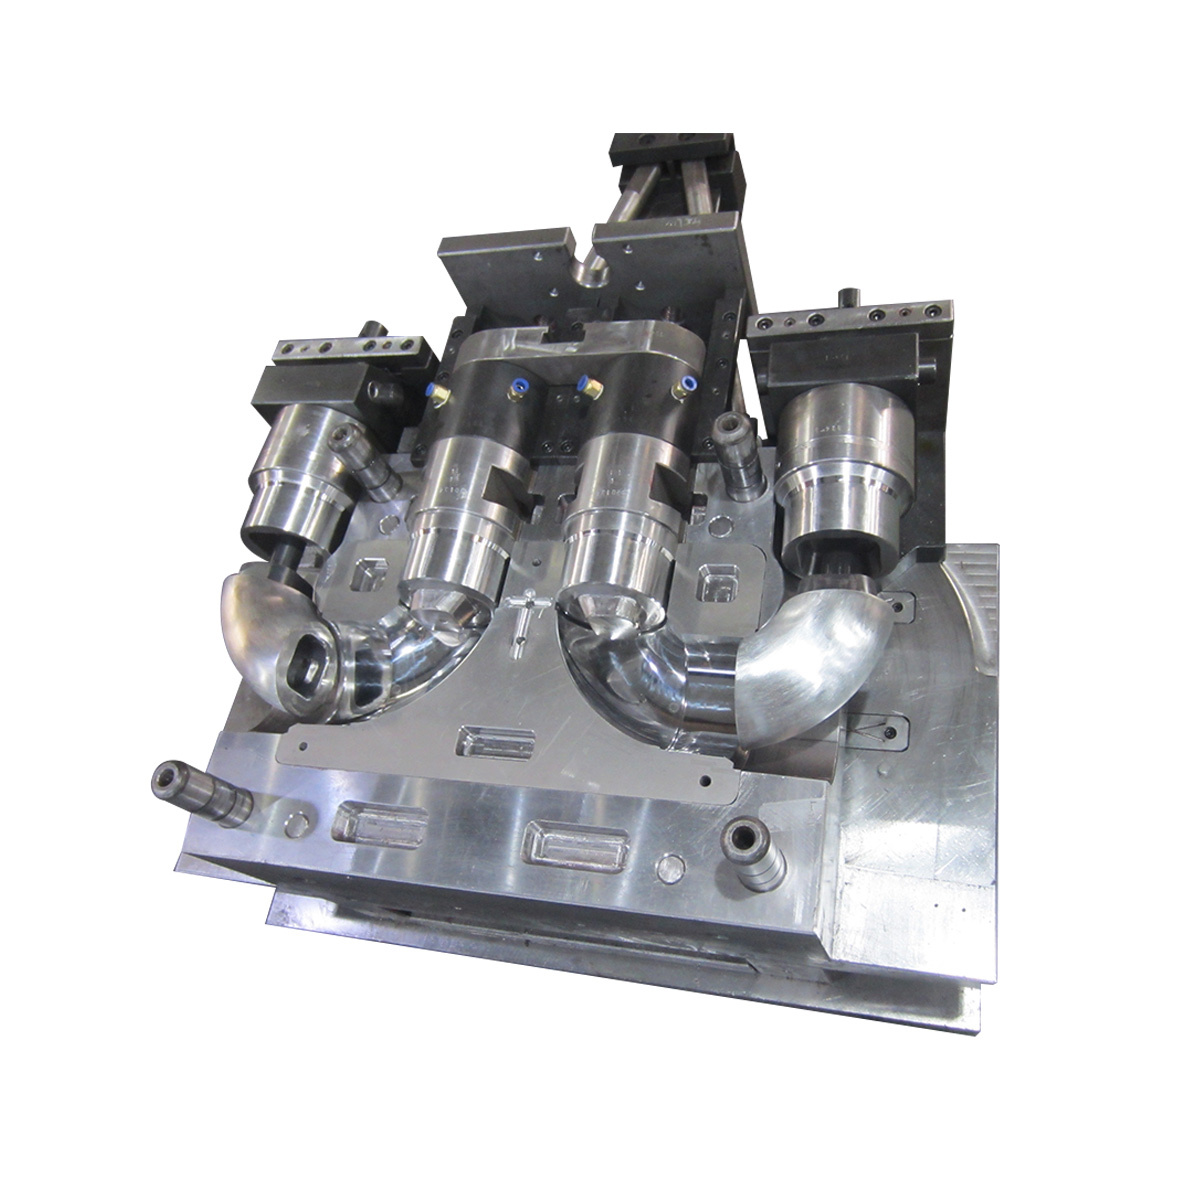 Pipe fitting mould